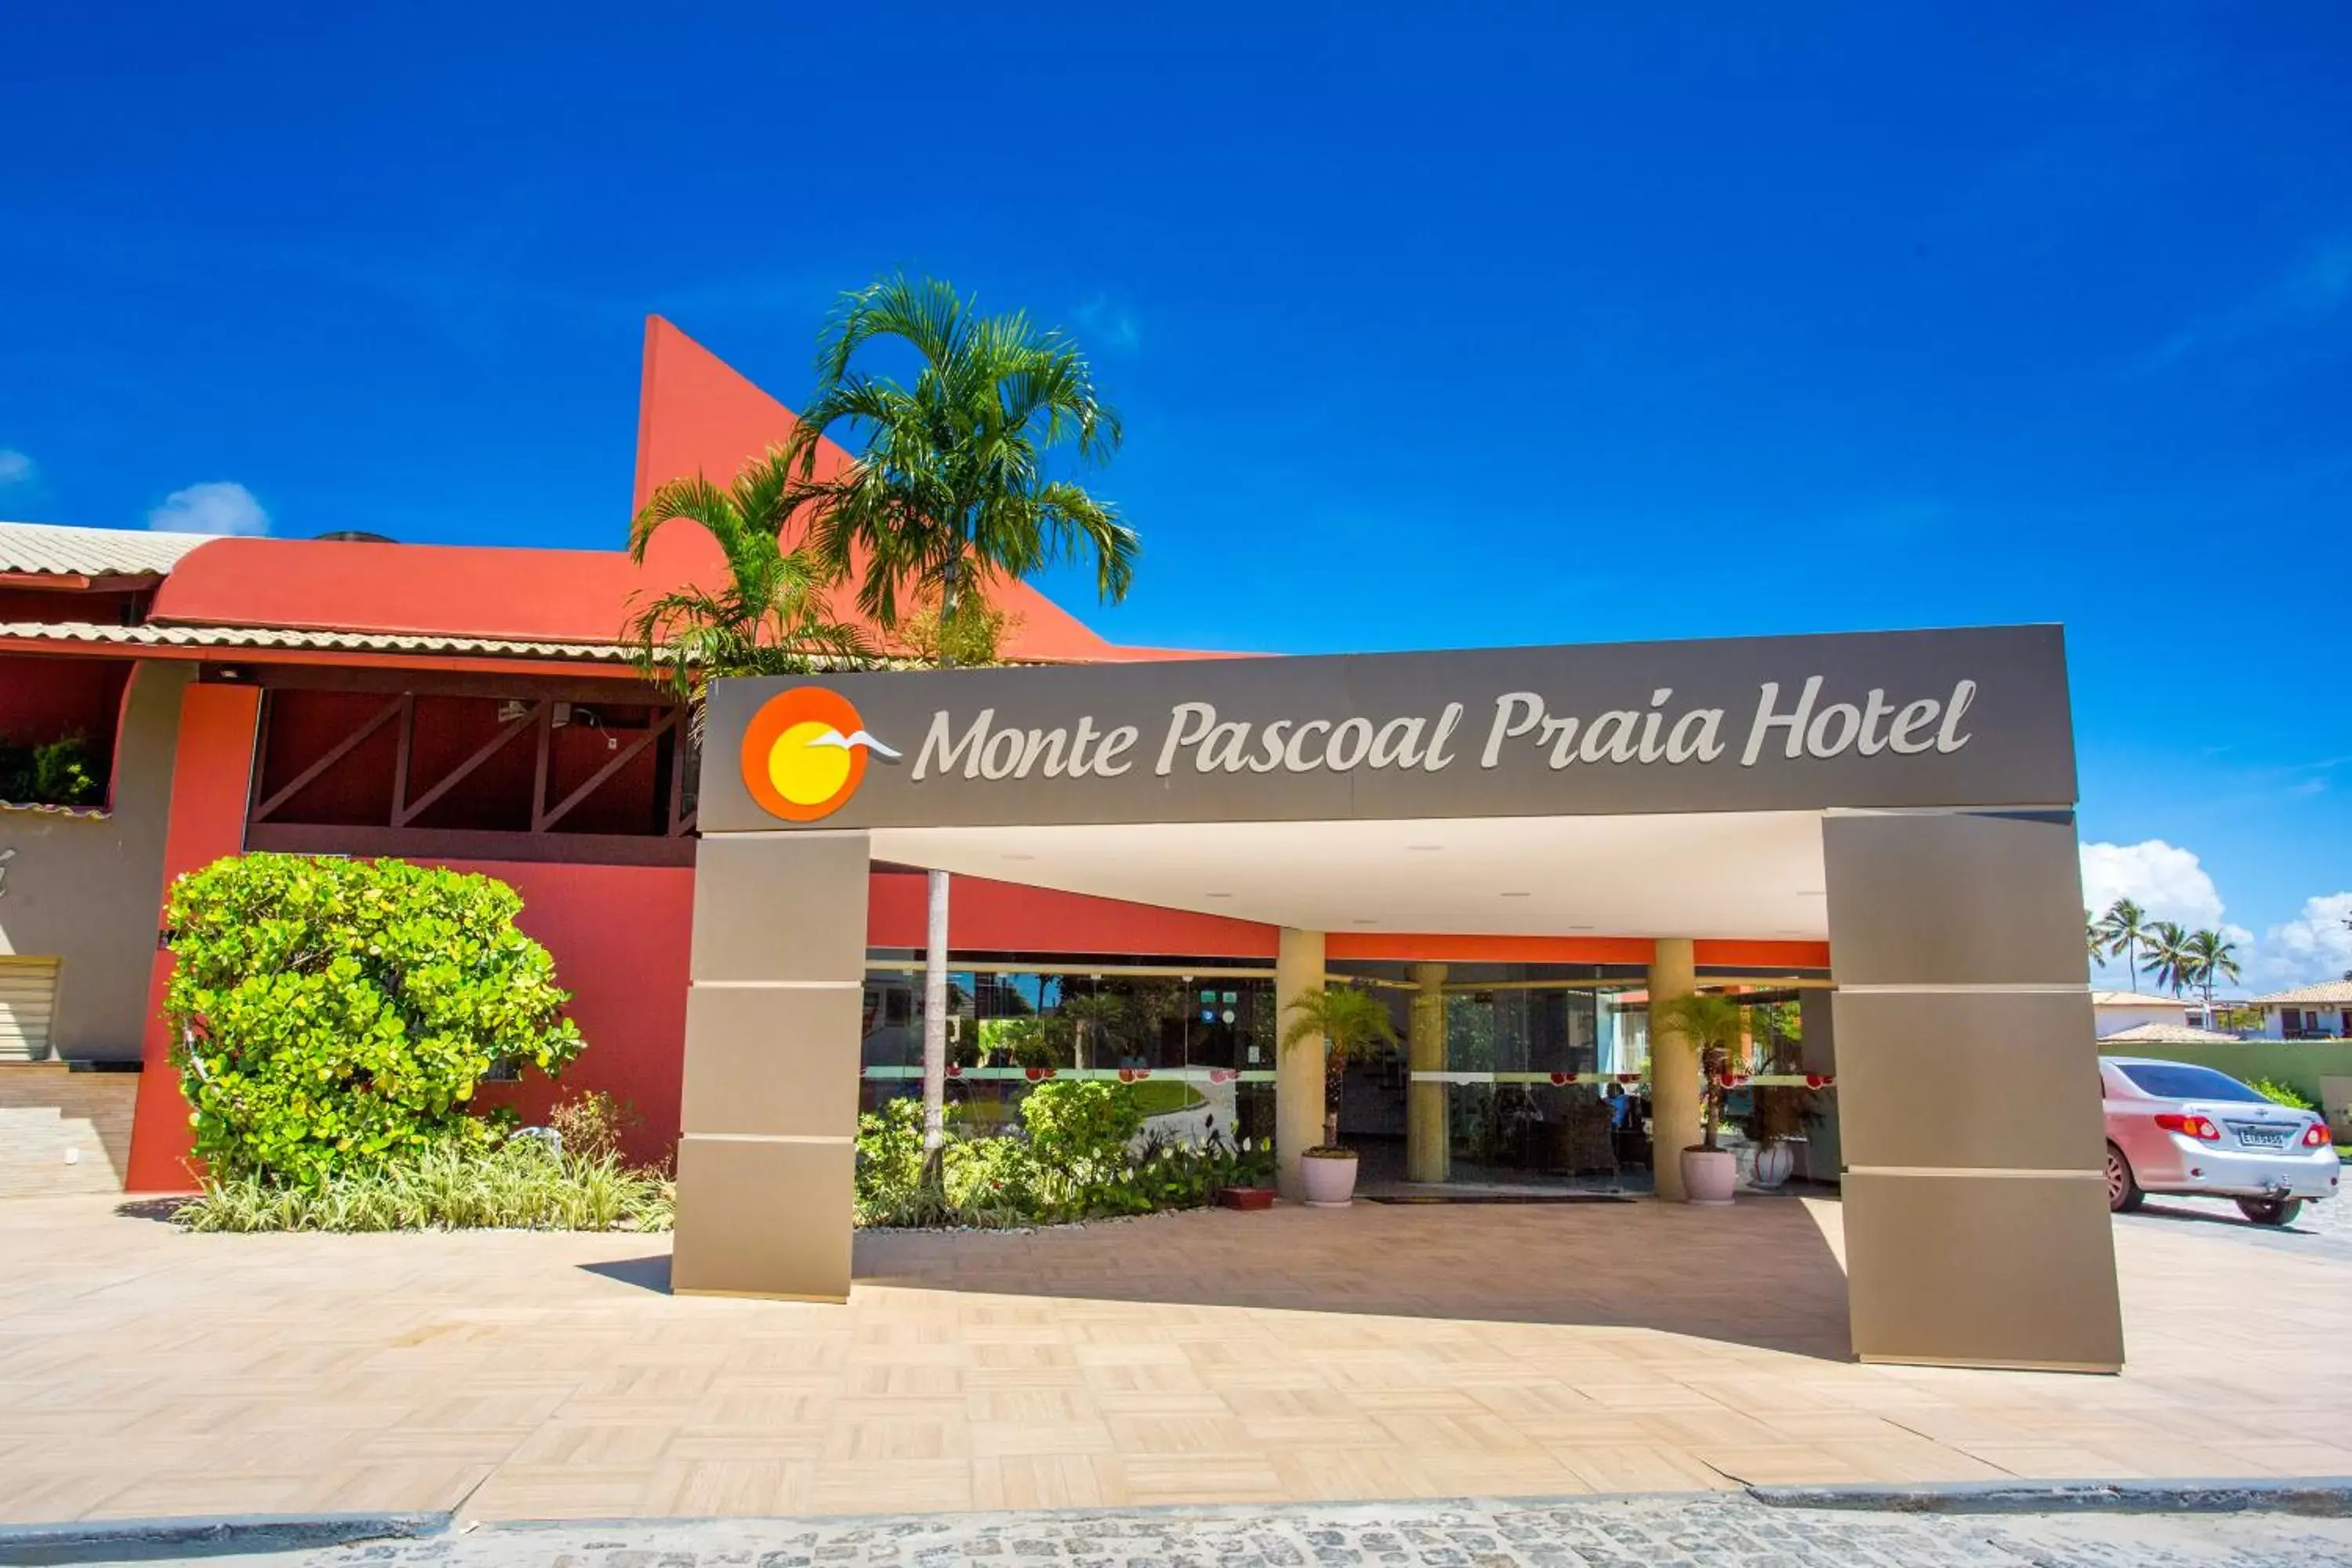 Property building in Monte Pascoal Praia Hotel